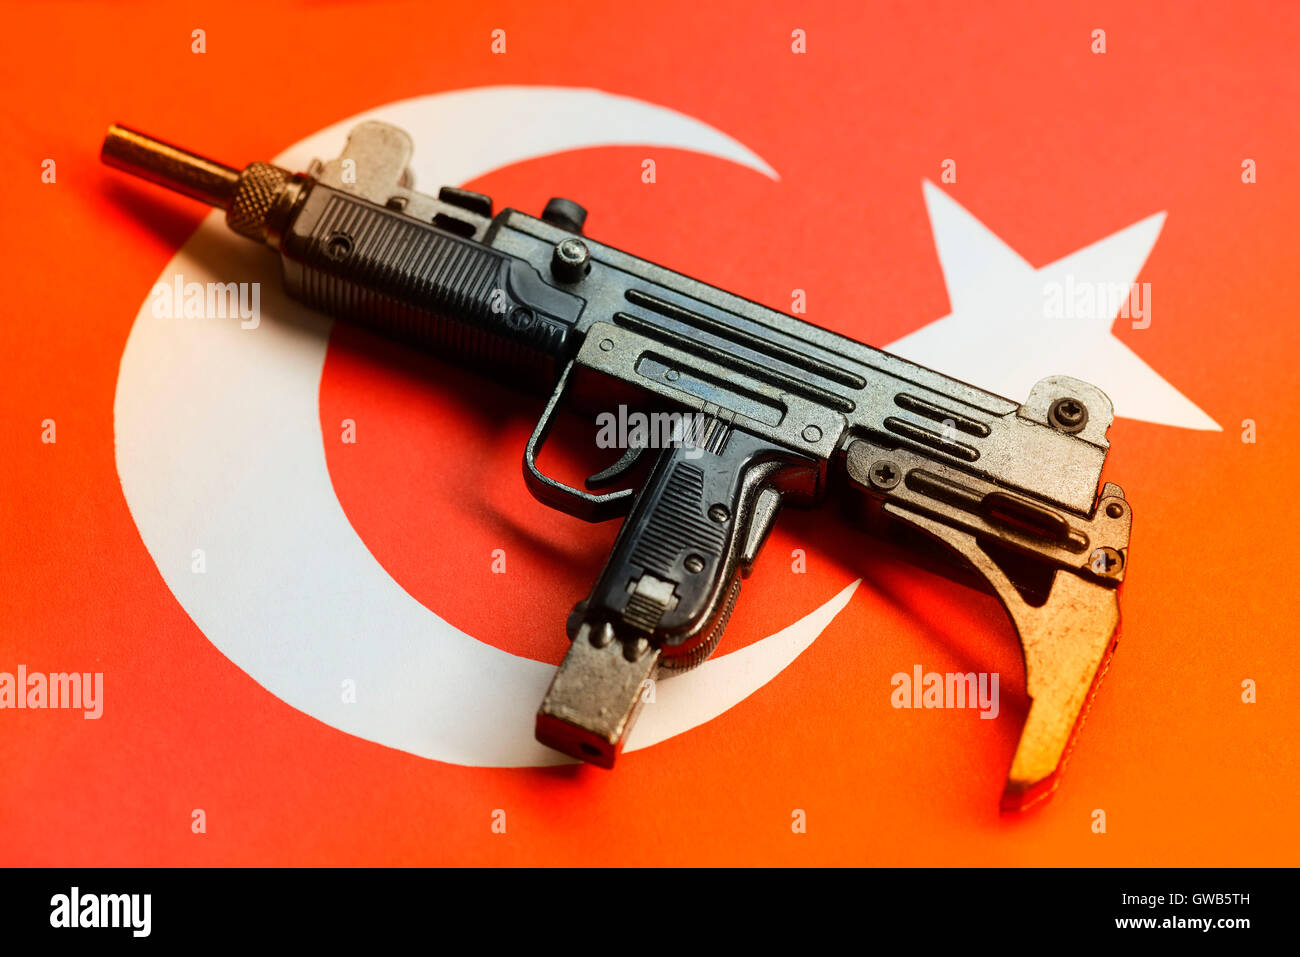 Submachine gun on Turkish flag, symbolic photo for the reproach of the support of terrorist groupings, Maschinenpistole auf tuer Stock Photo